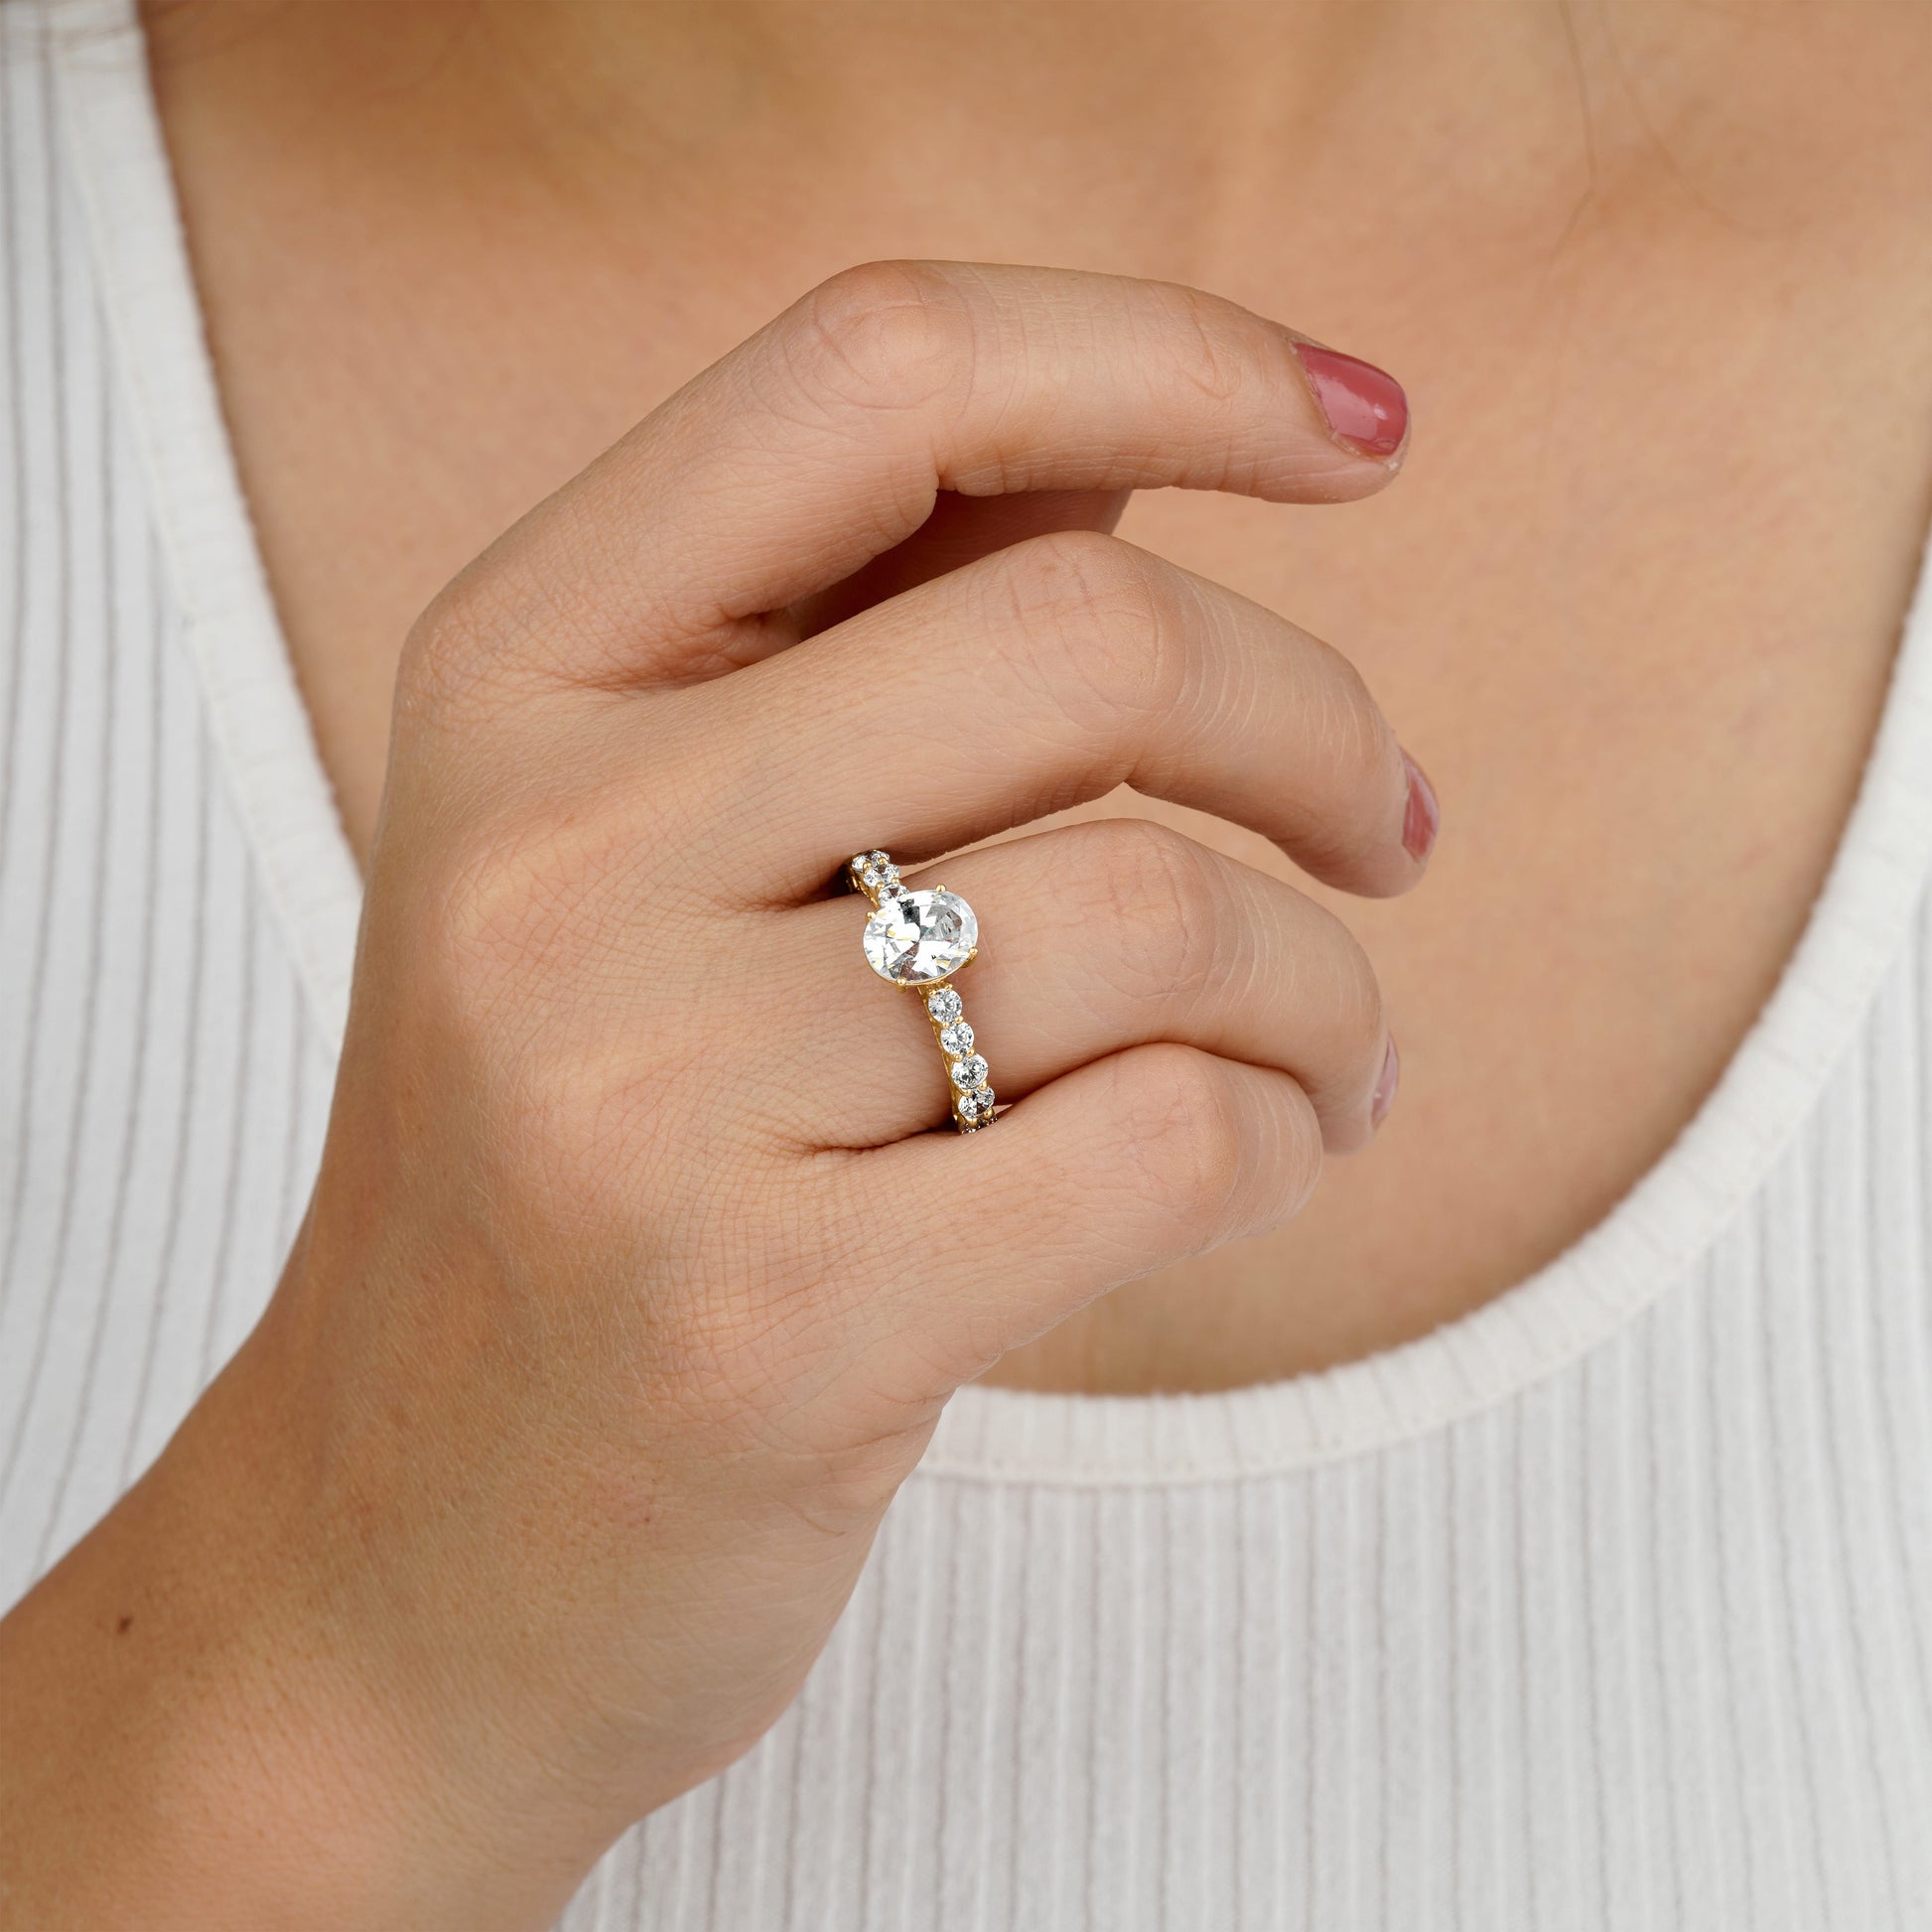 she is wearing Solitaire Engagement Ring